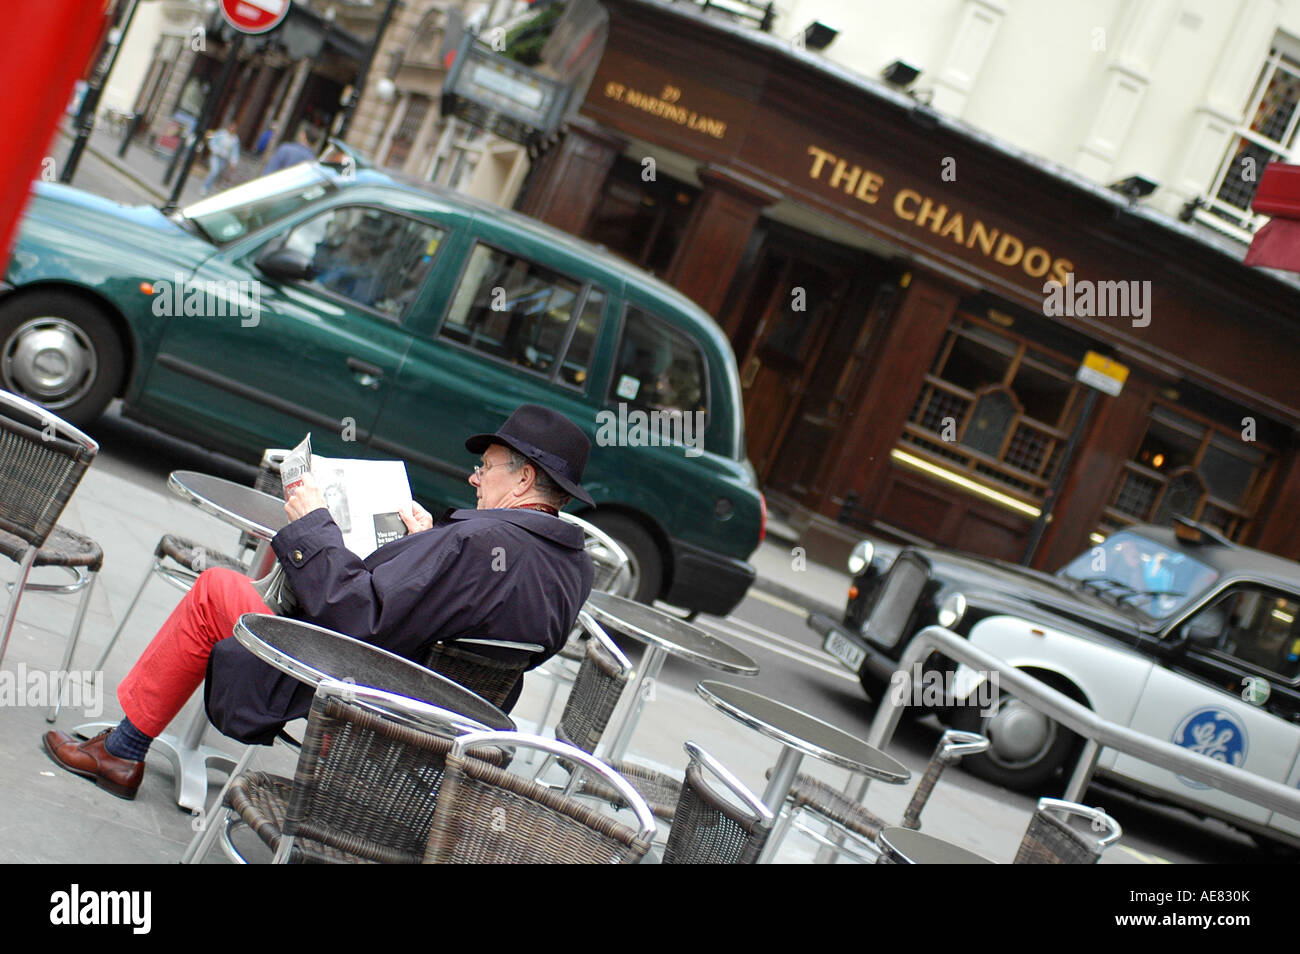 Man reads a newspaper outside an English pub as London cabs pass Stock Photo